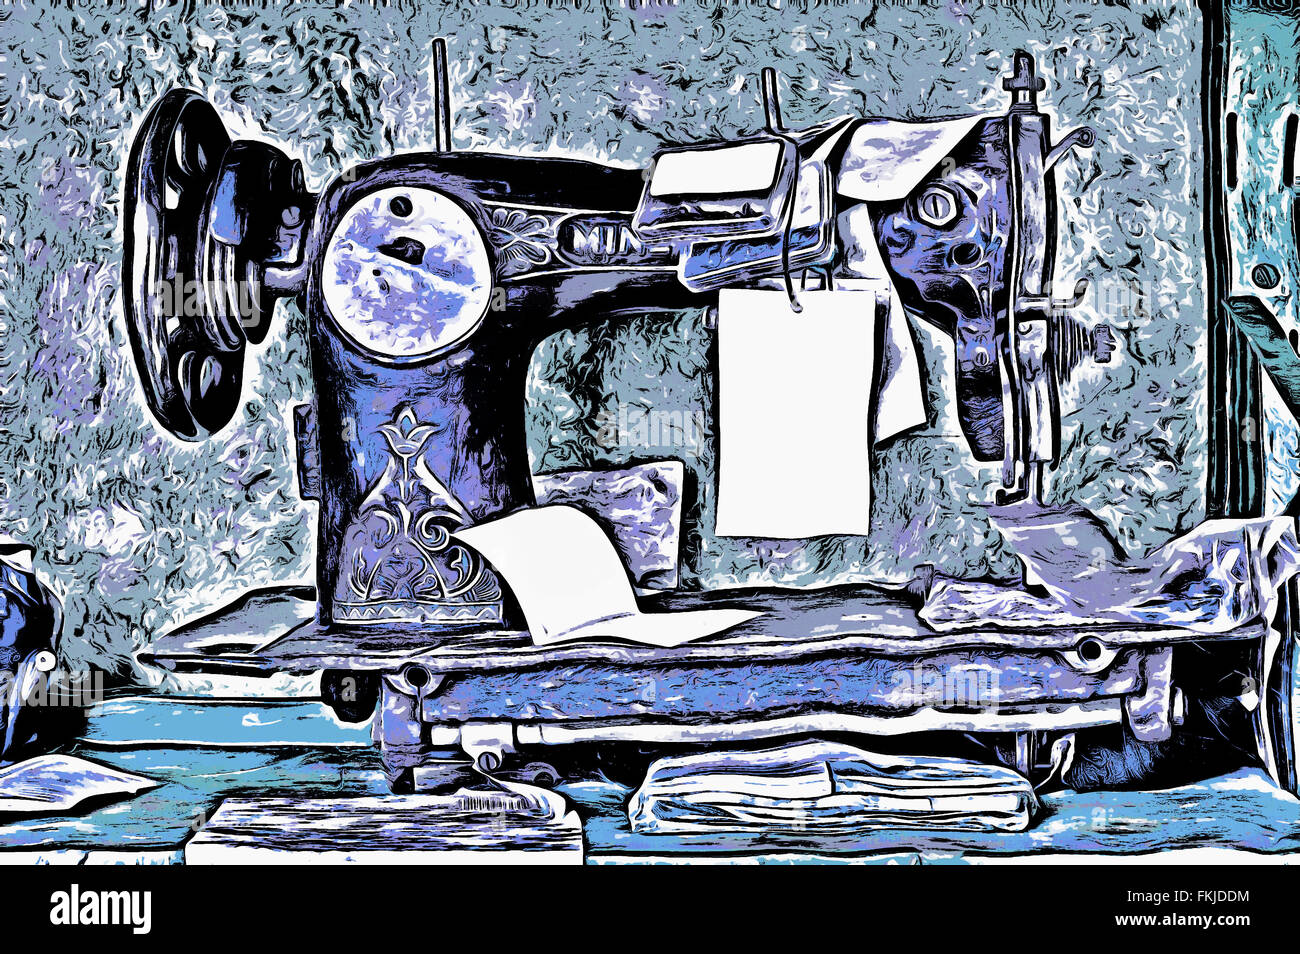 Old sewing machine Stock Photo